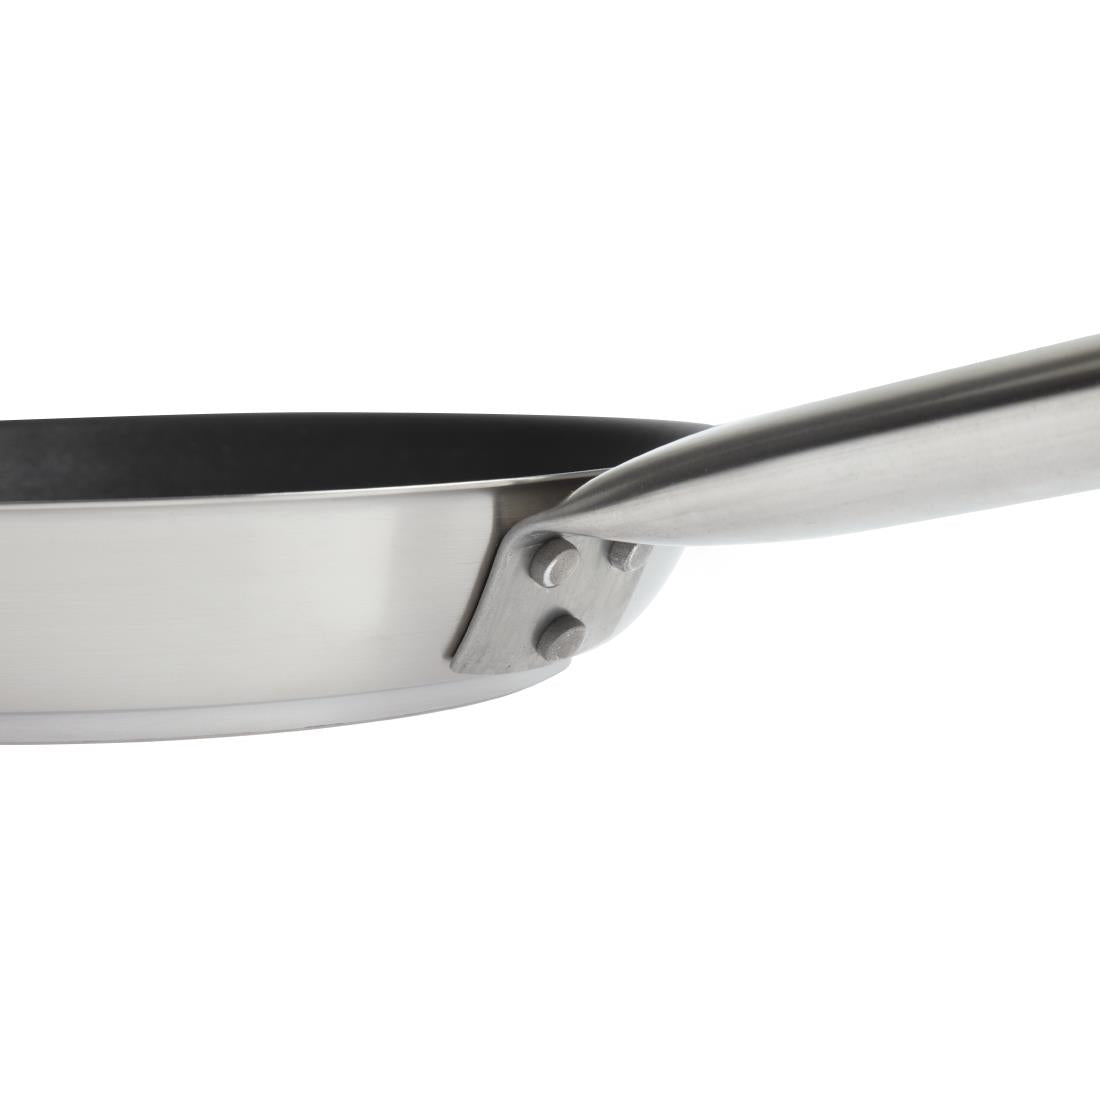 CX538 Matfer Bourgeat Tradition Pro Non-Stick Frying Pan 20cm JD Catering Equipment Solutions Ltd